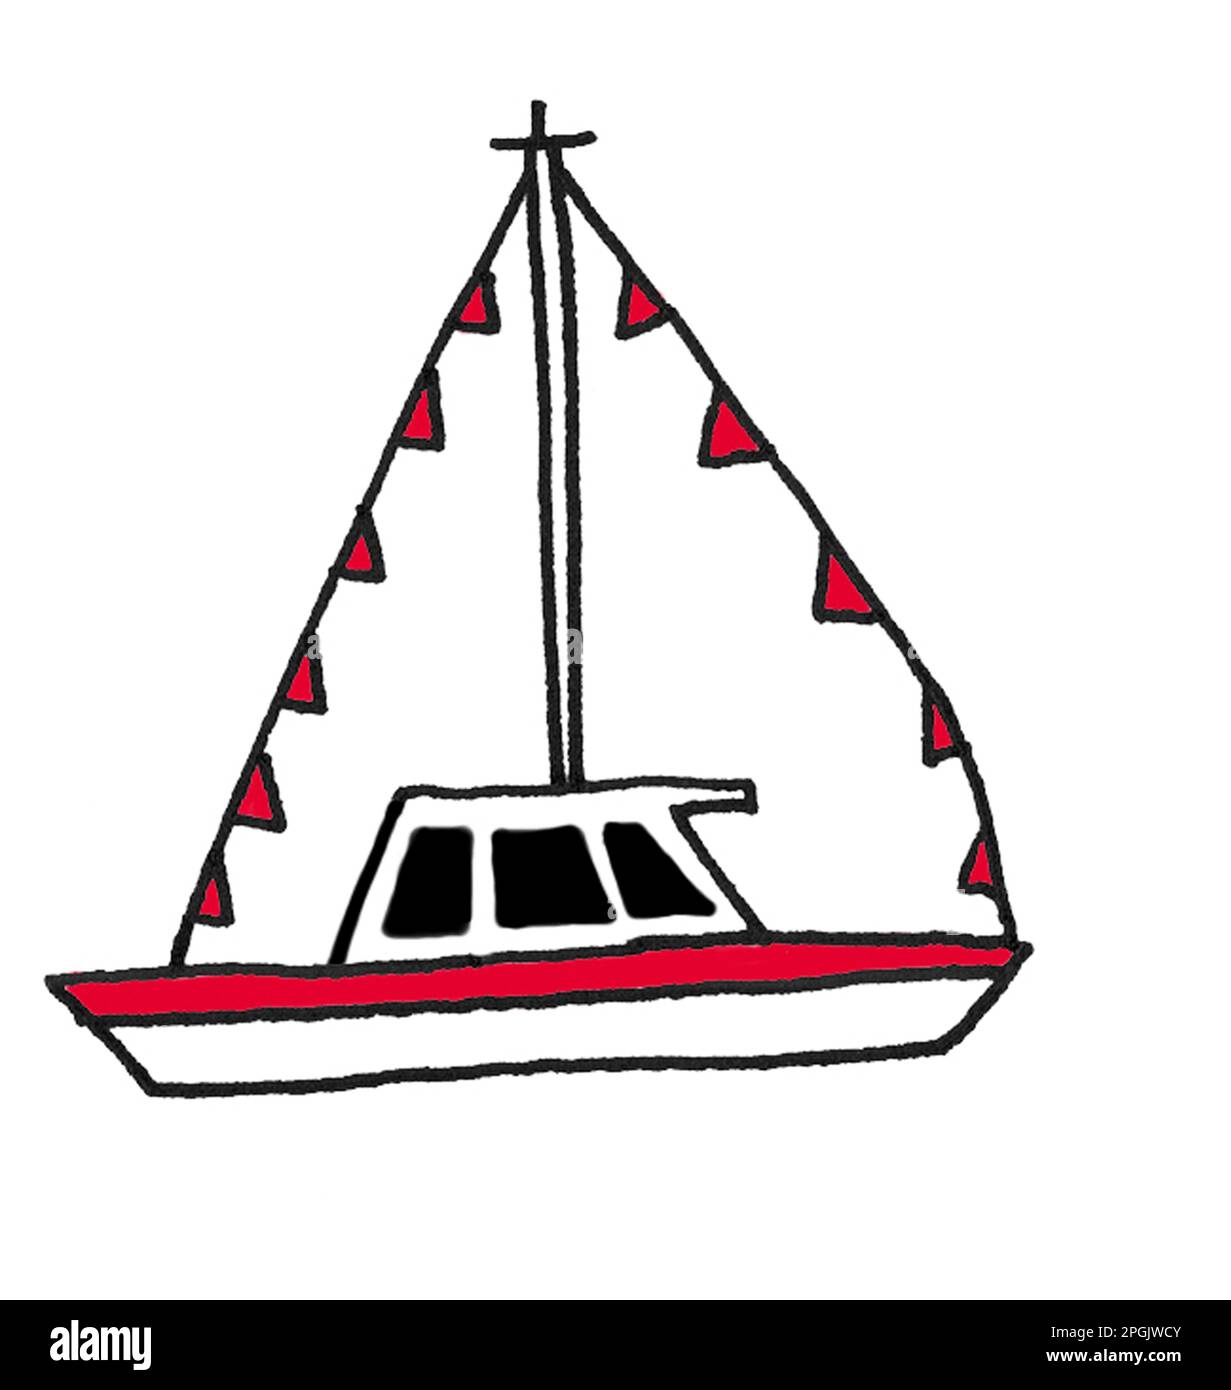 Illustration of a red boat Stock Photo